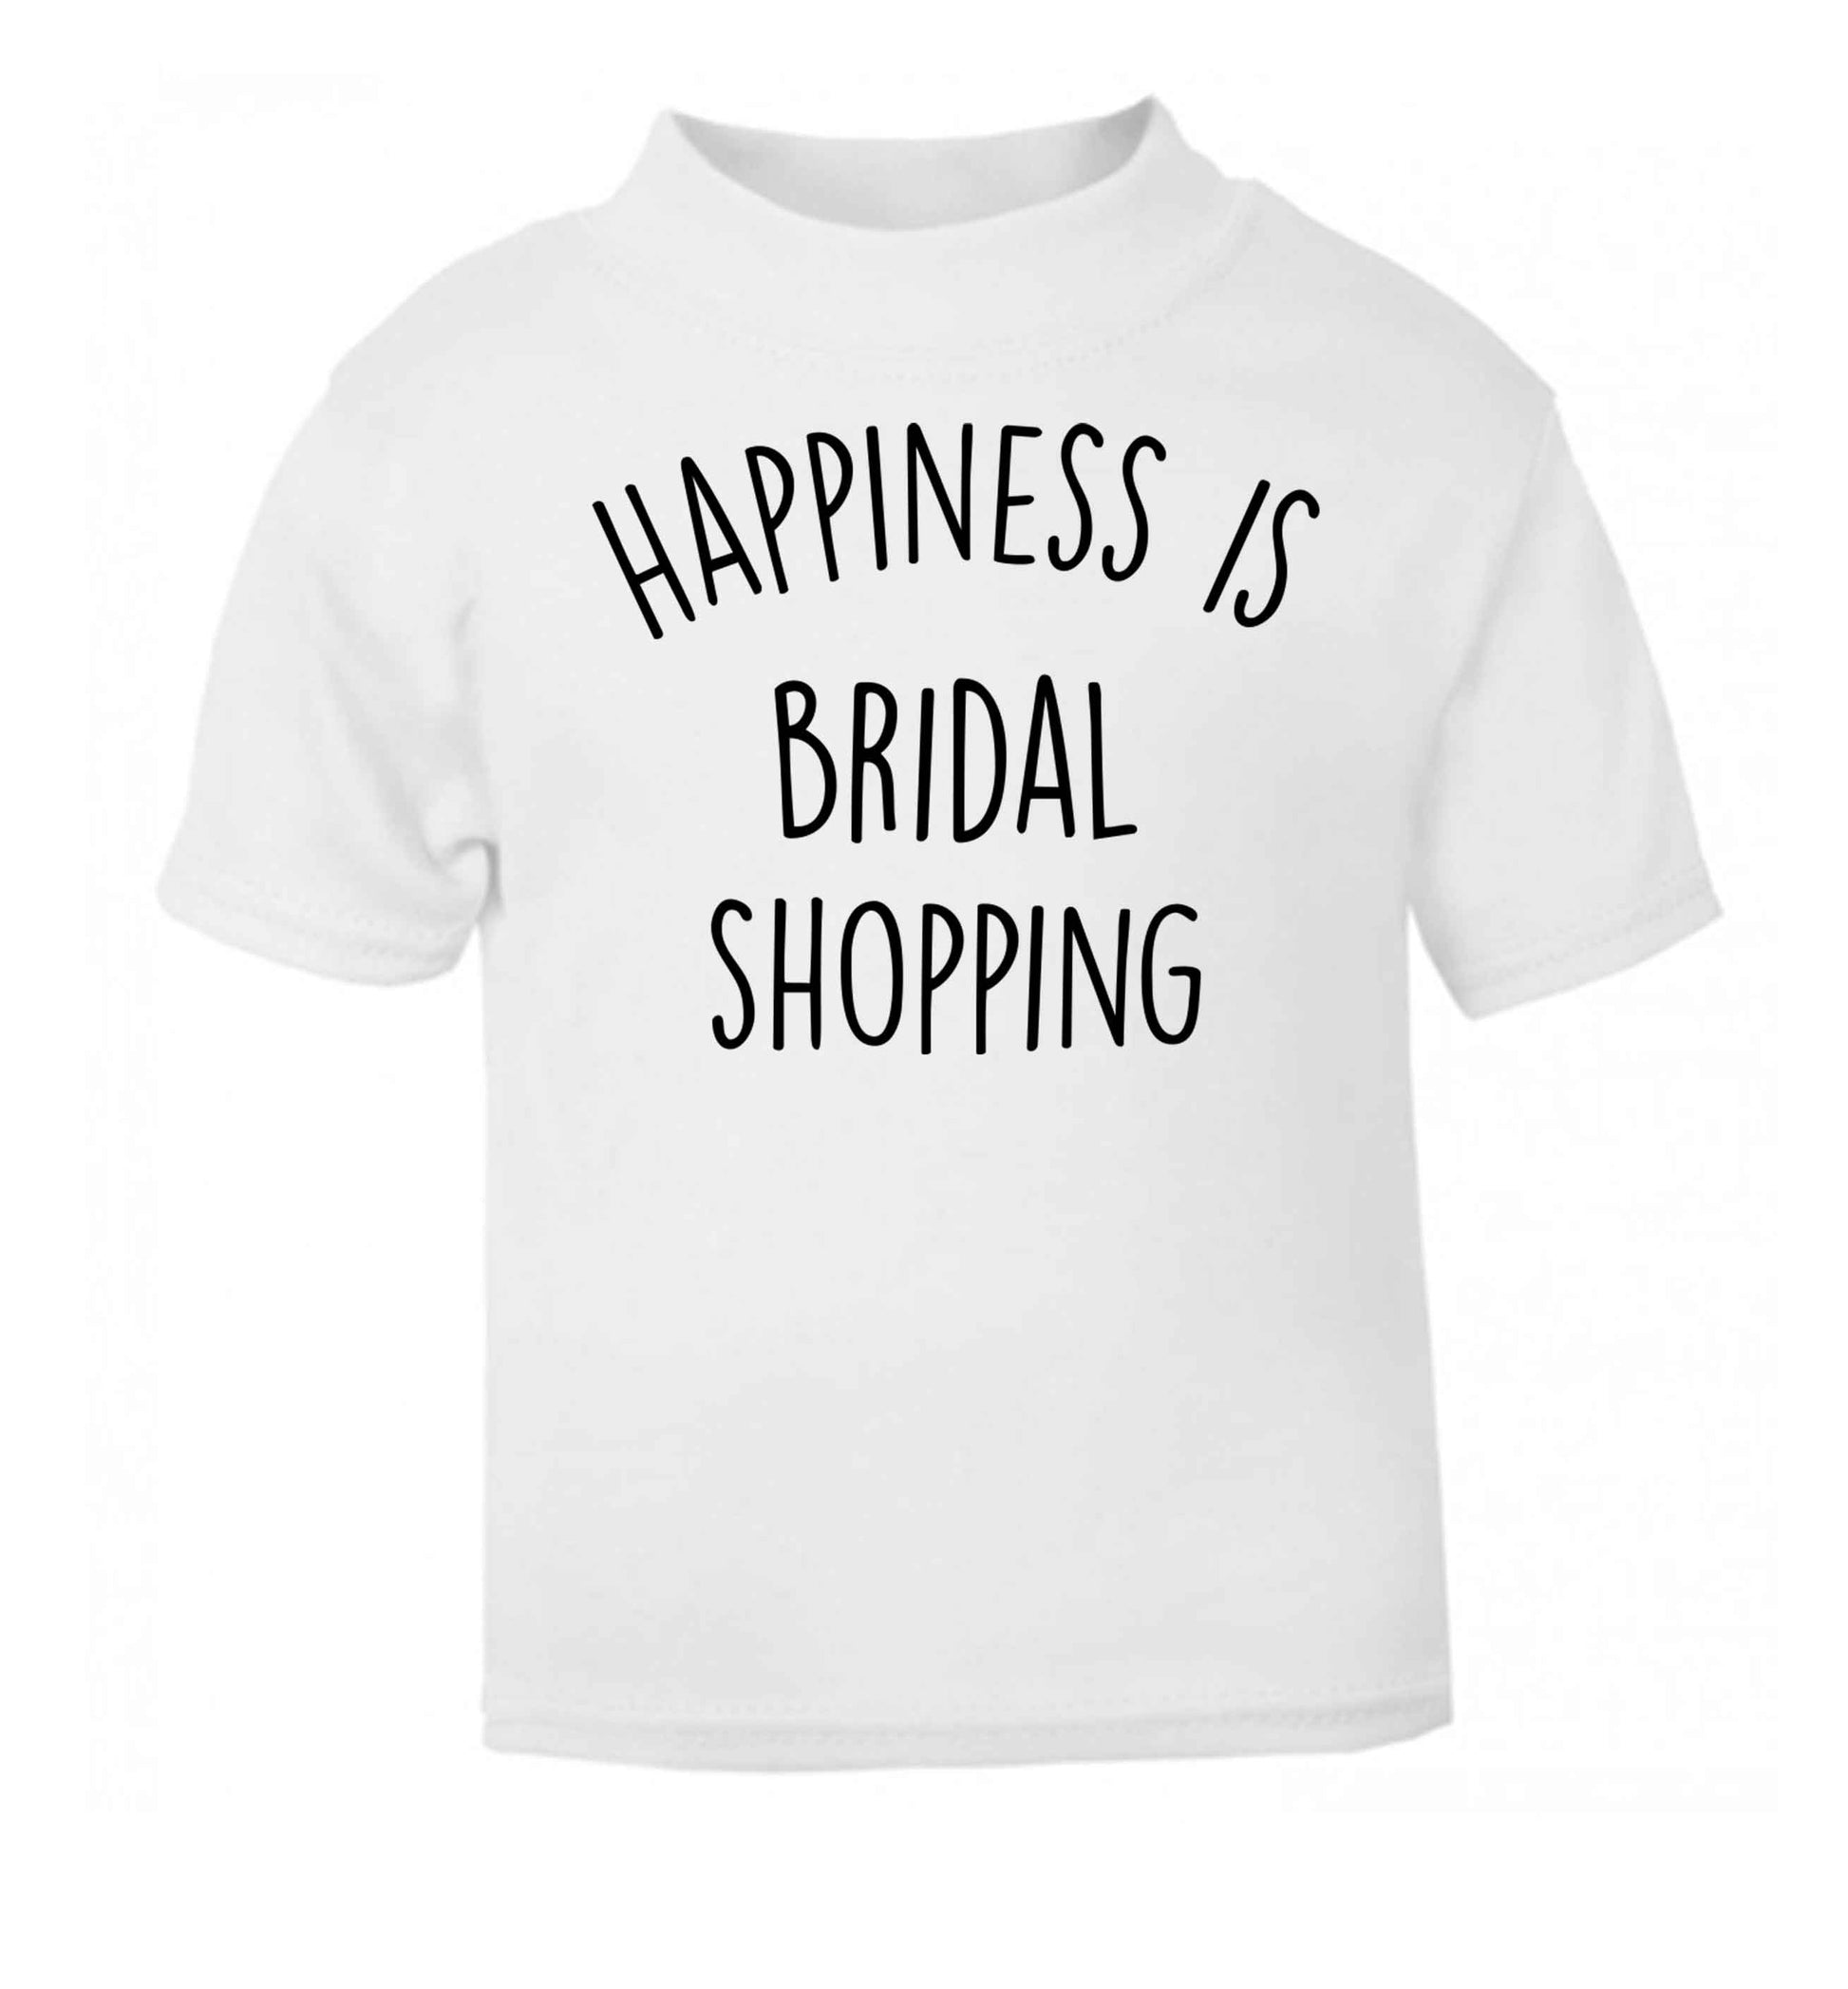 Happiness is bridal shopping white baby toddler Tshirt 2 Years